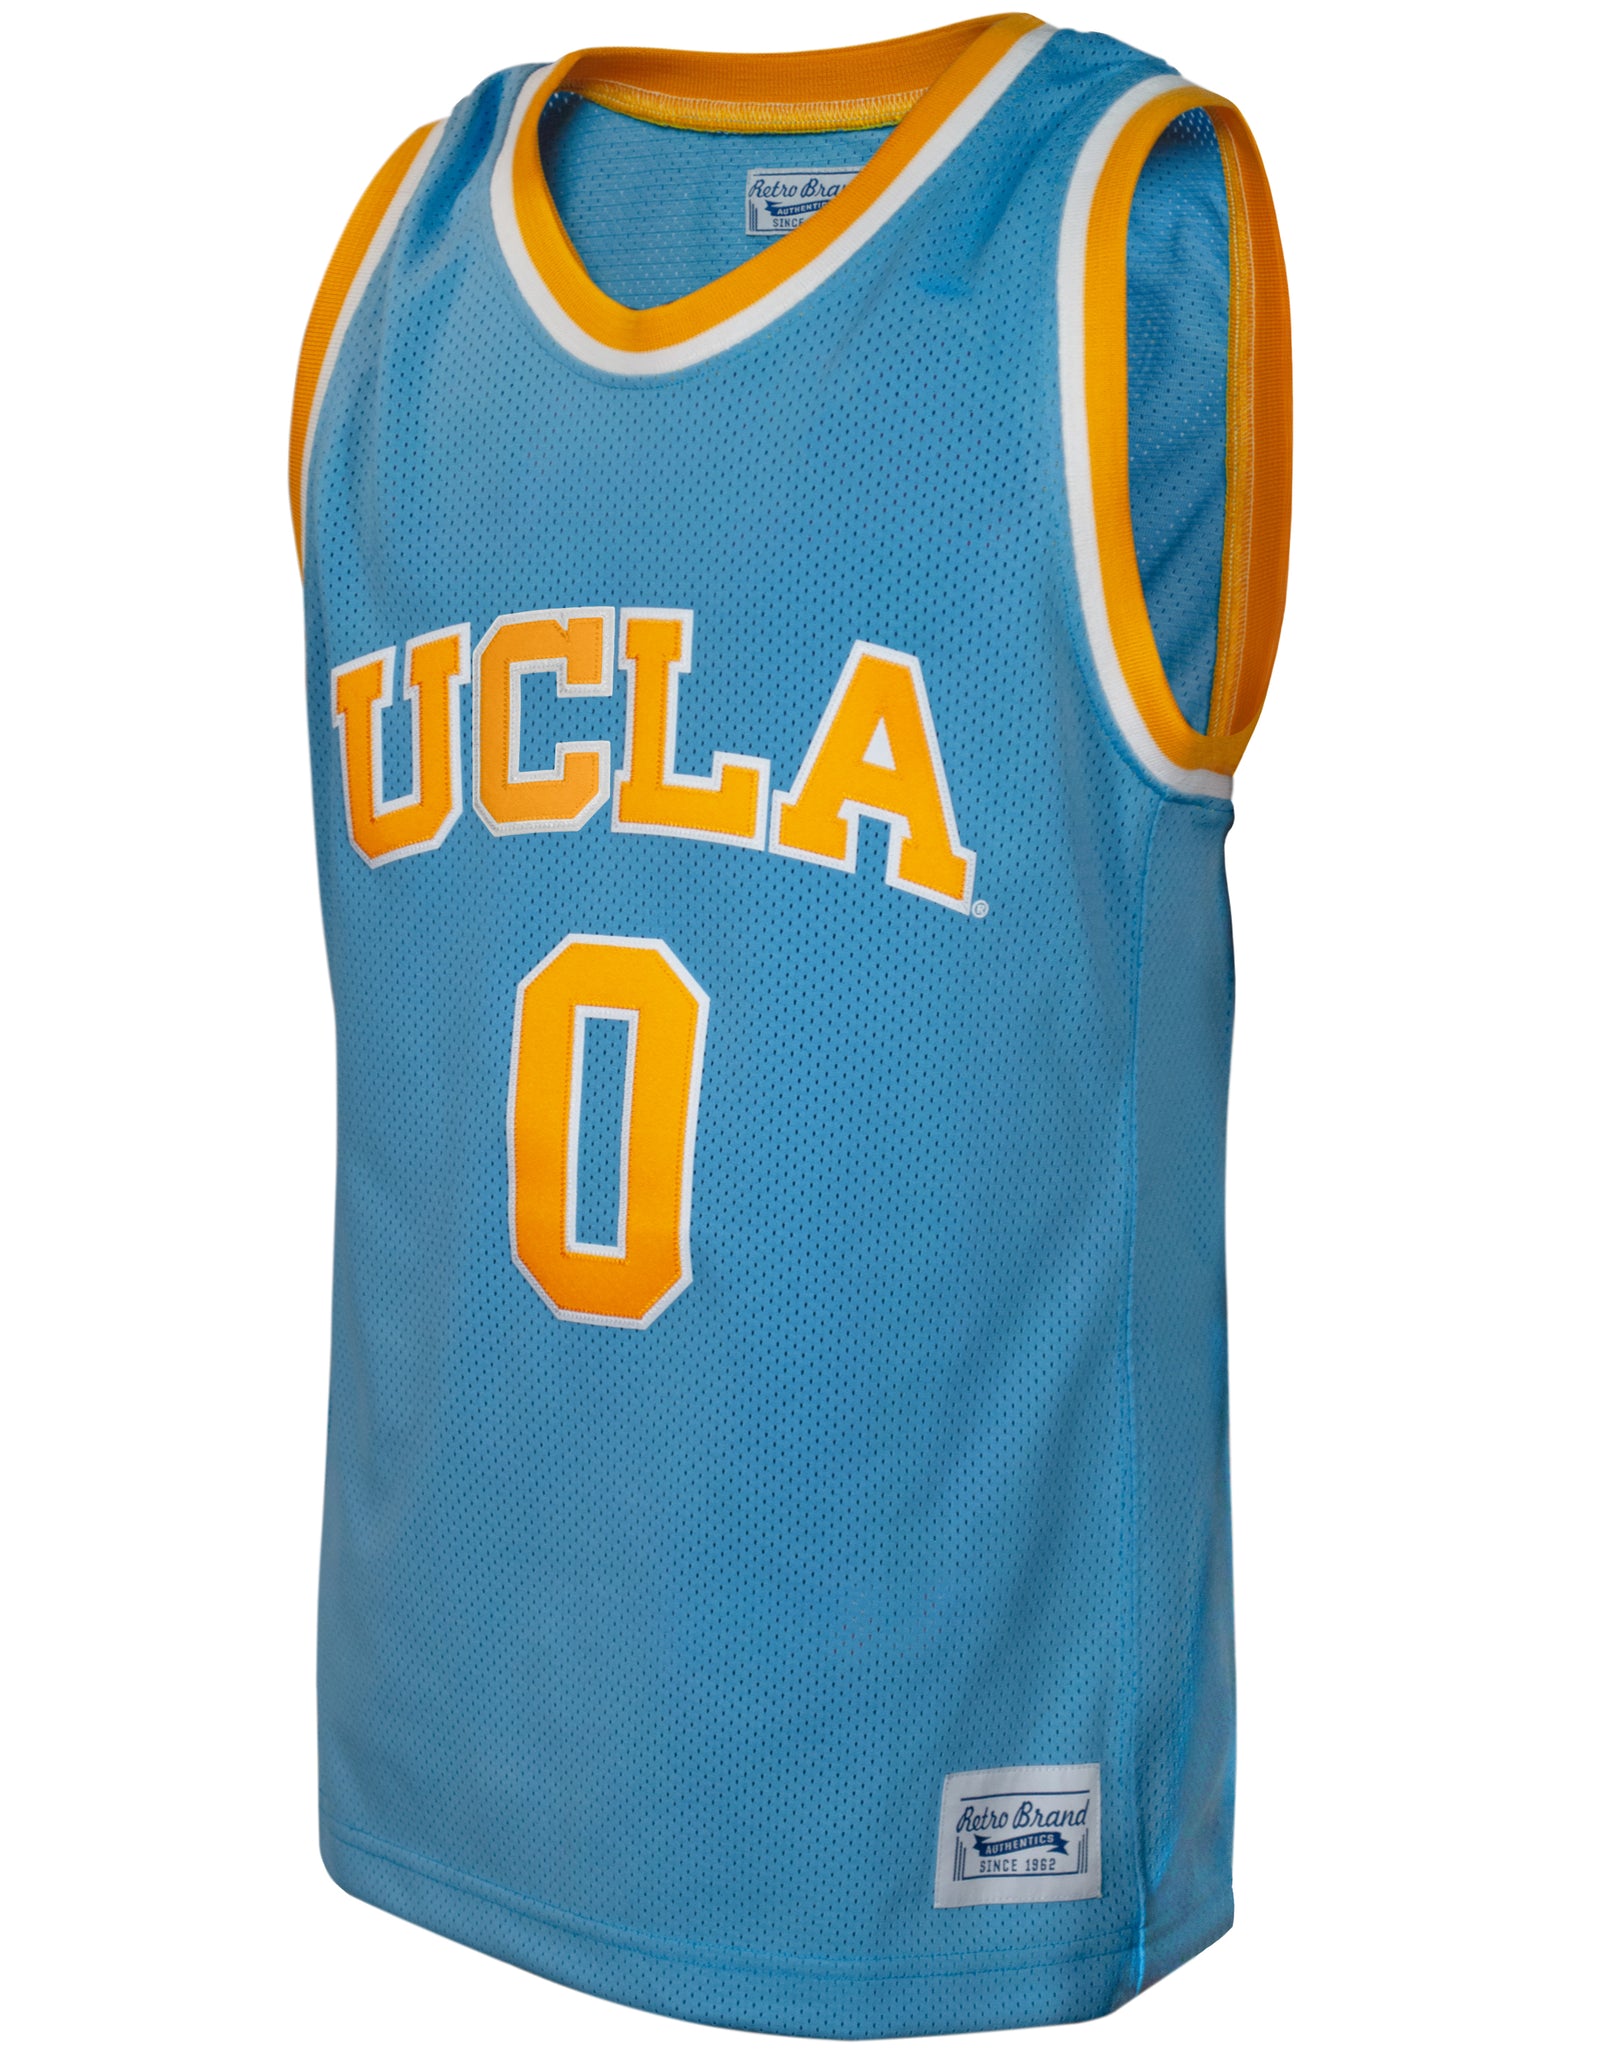 Russell Westbrook Ucla Jersey, Russell Westbrook College Jersey